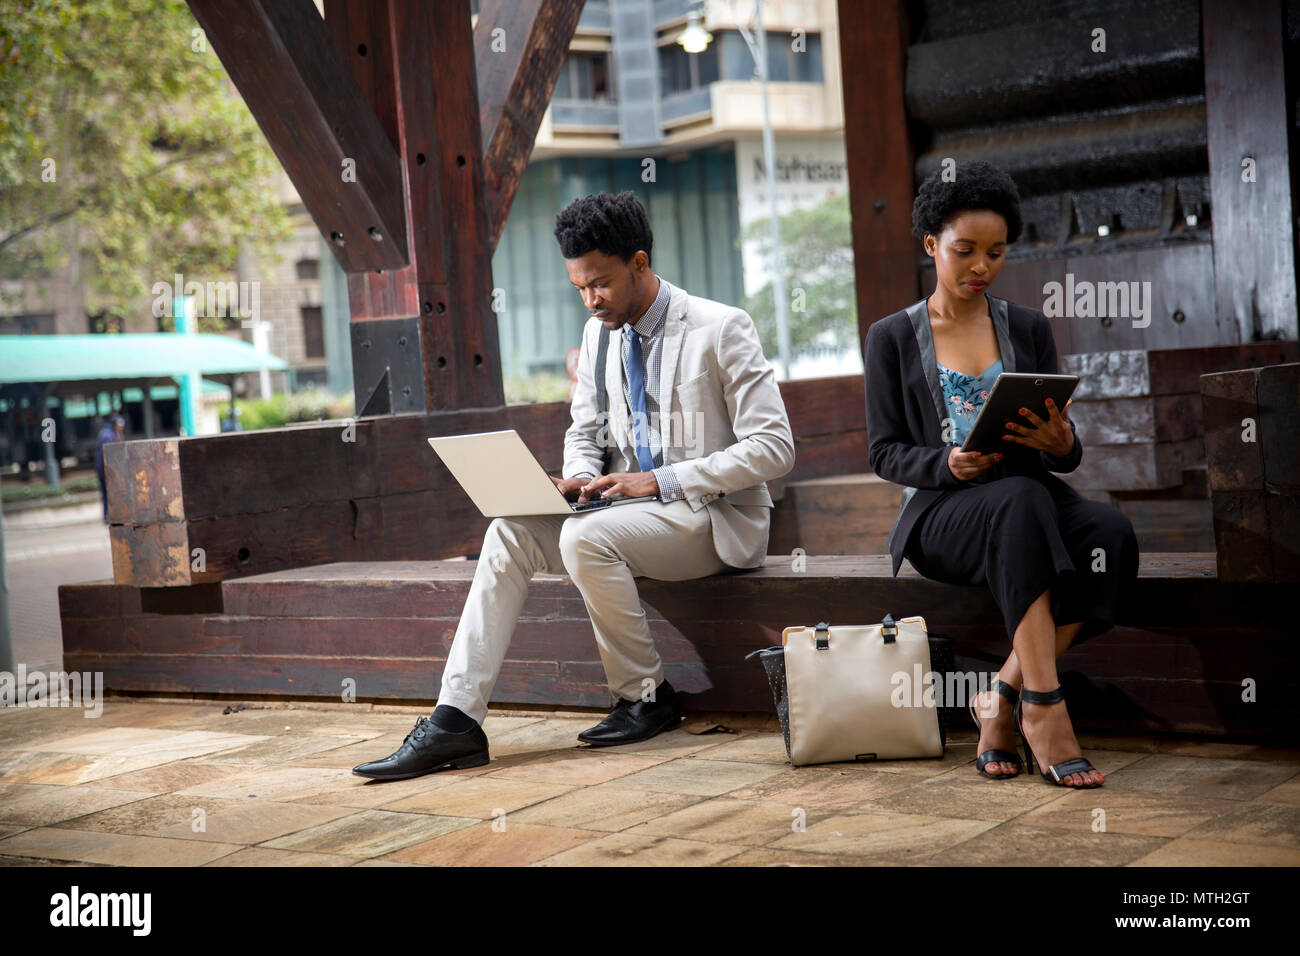 Business man and woman working Stock Photo